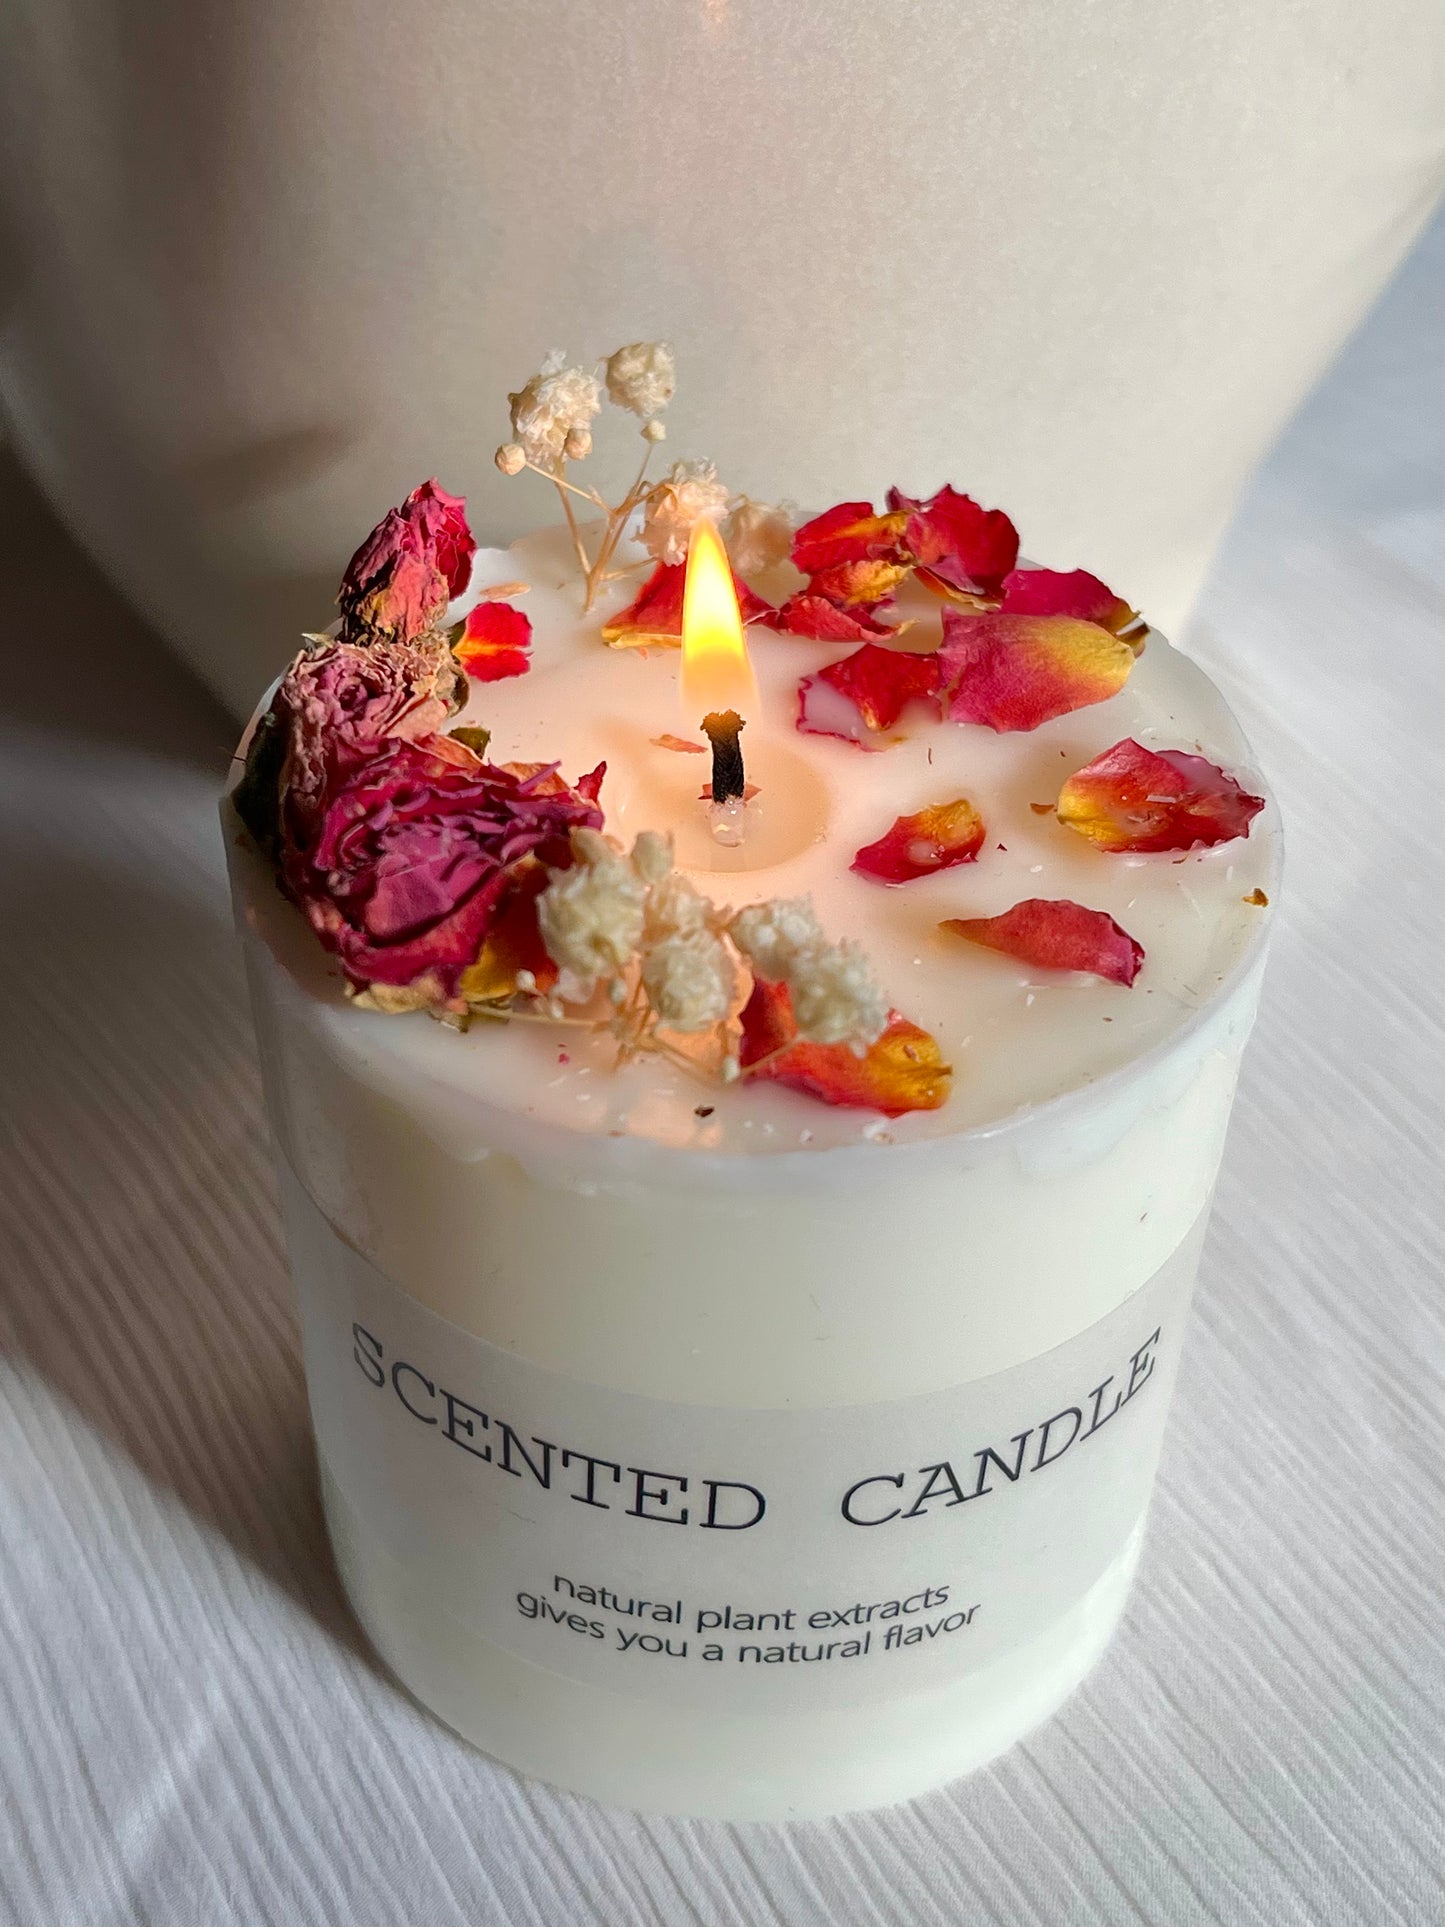 99 NAMES OF ALLAH - DRIED FLOWER CANDLE